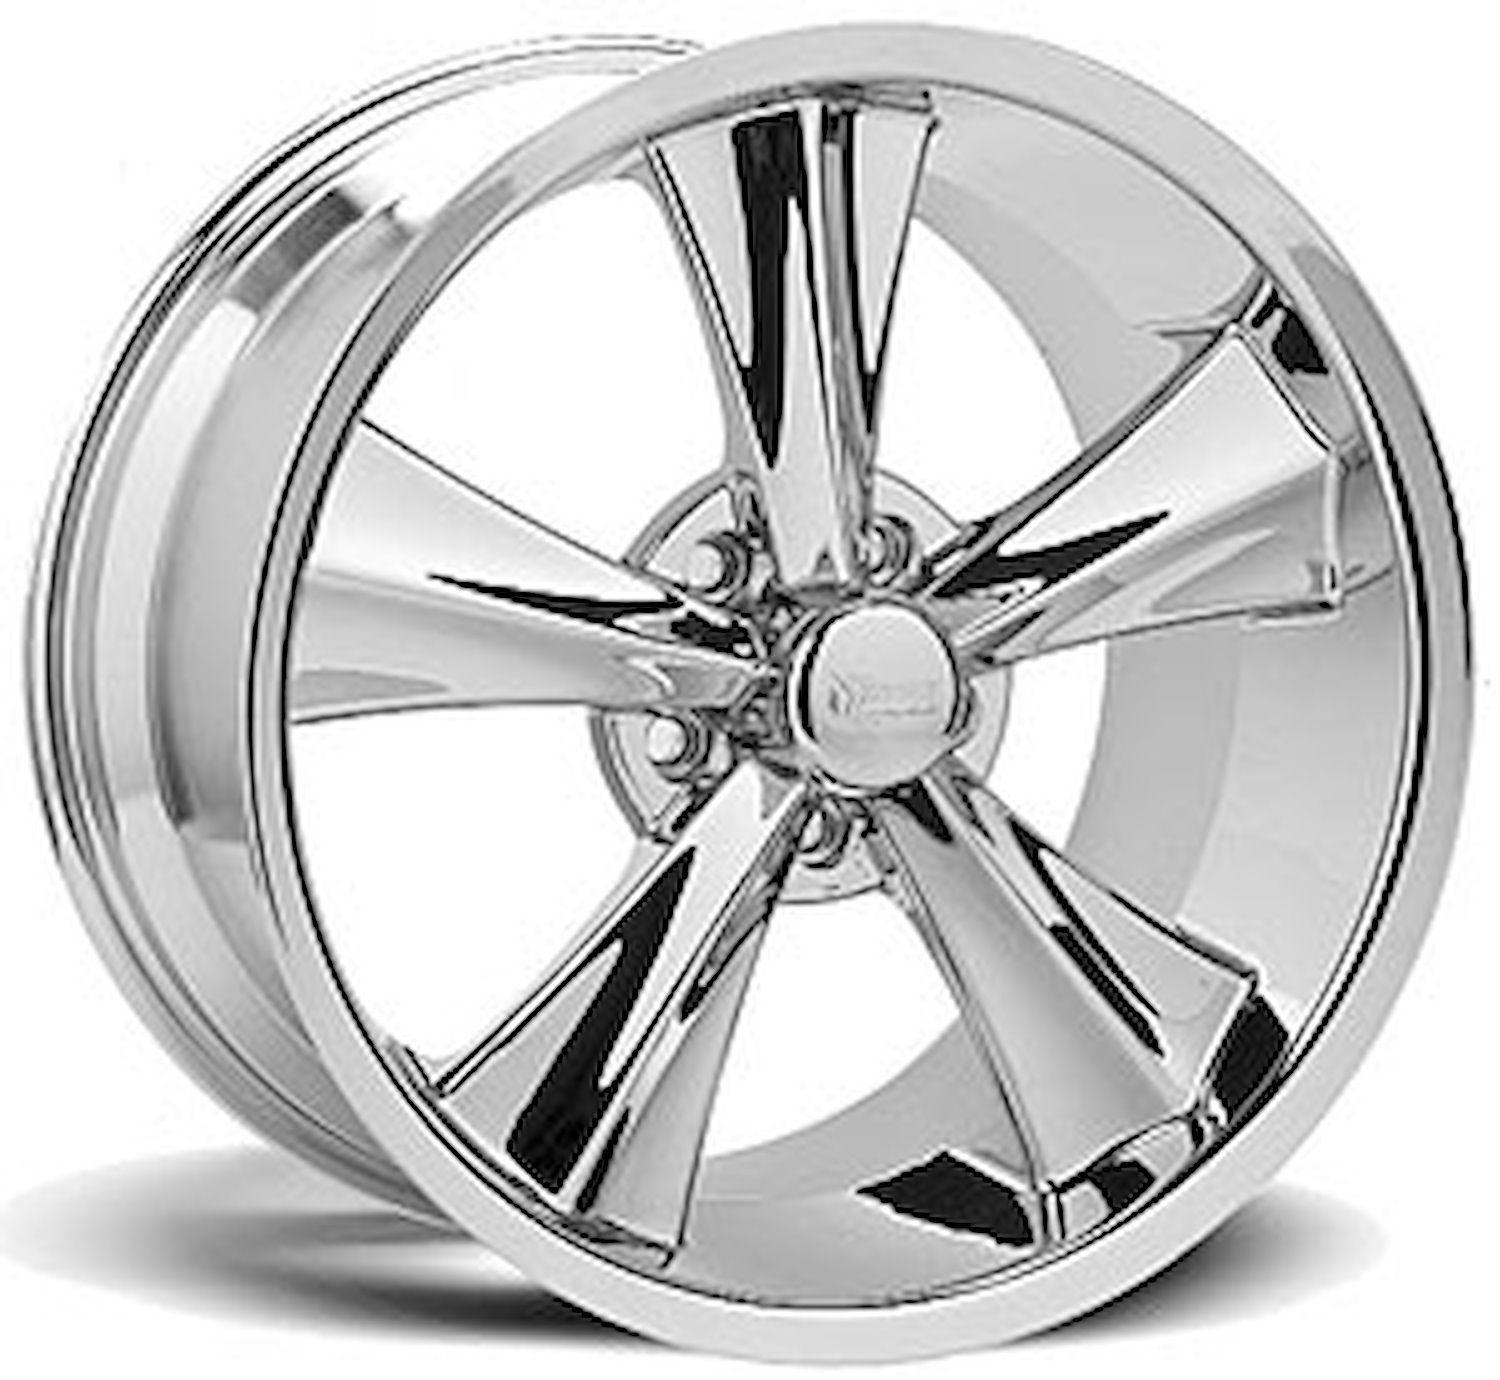 Modern Muscle Booster Wheel - Chrome 2005-Up Mustang